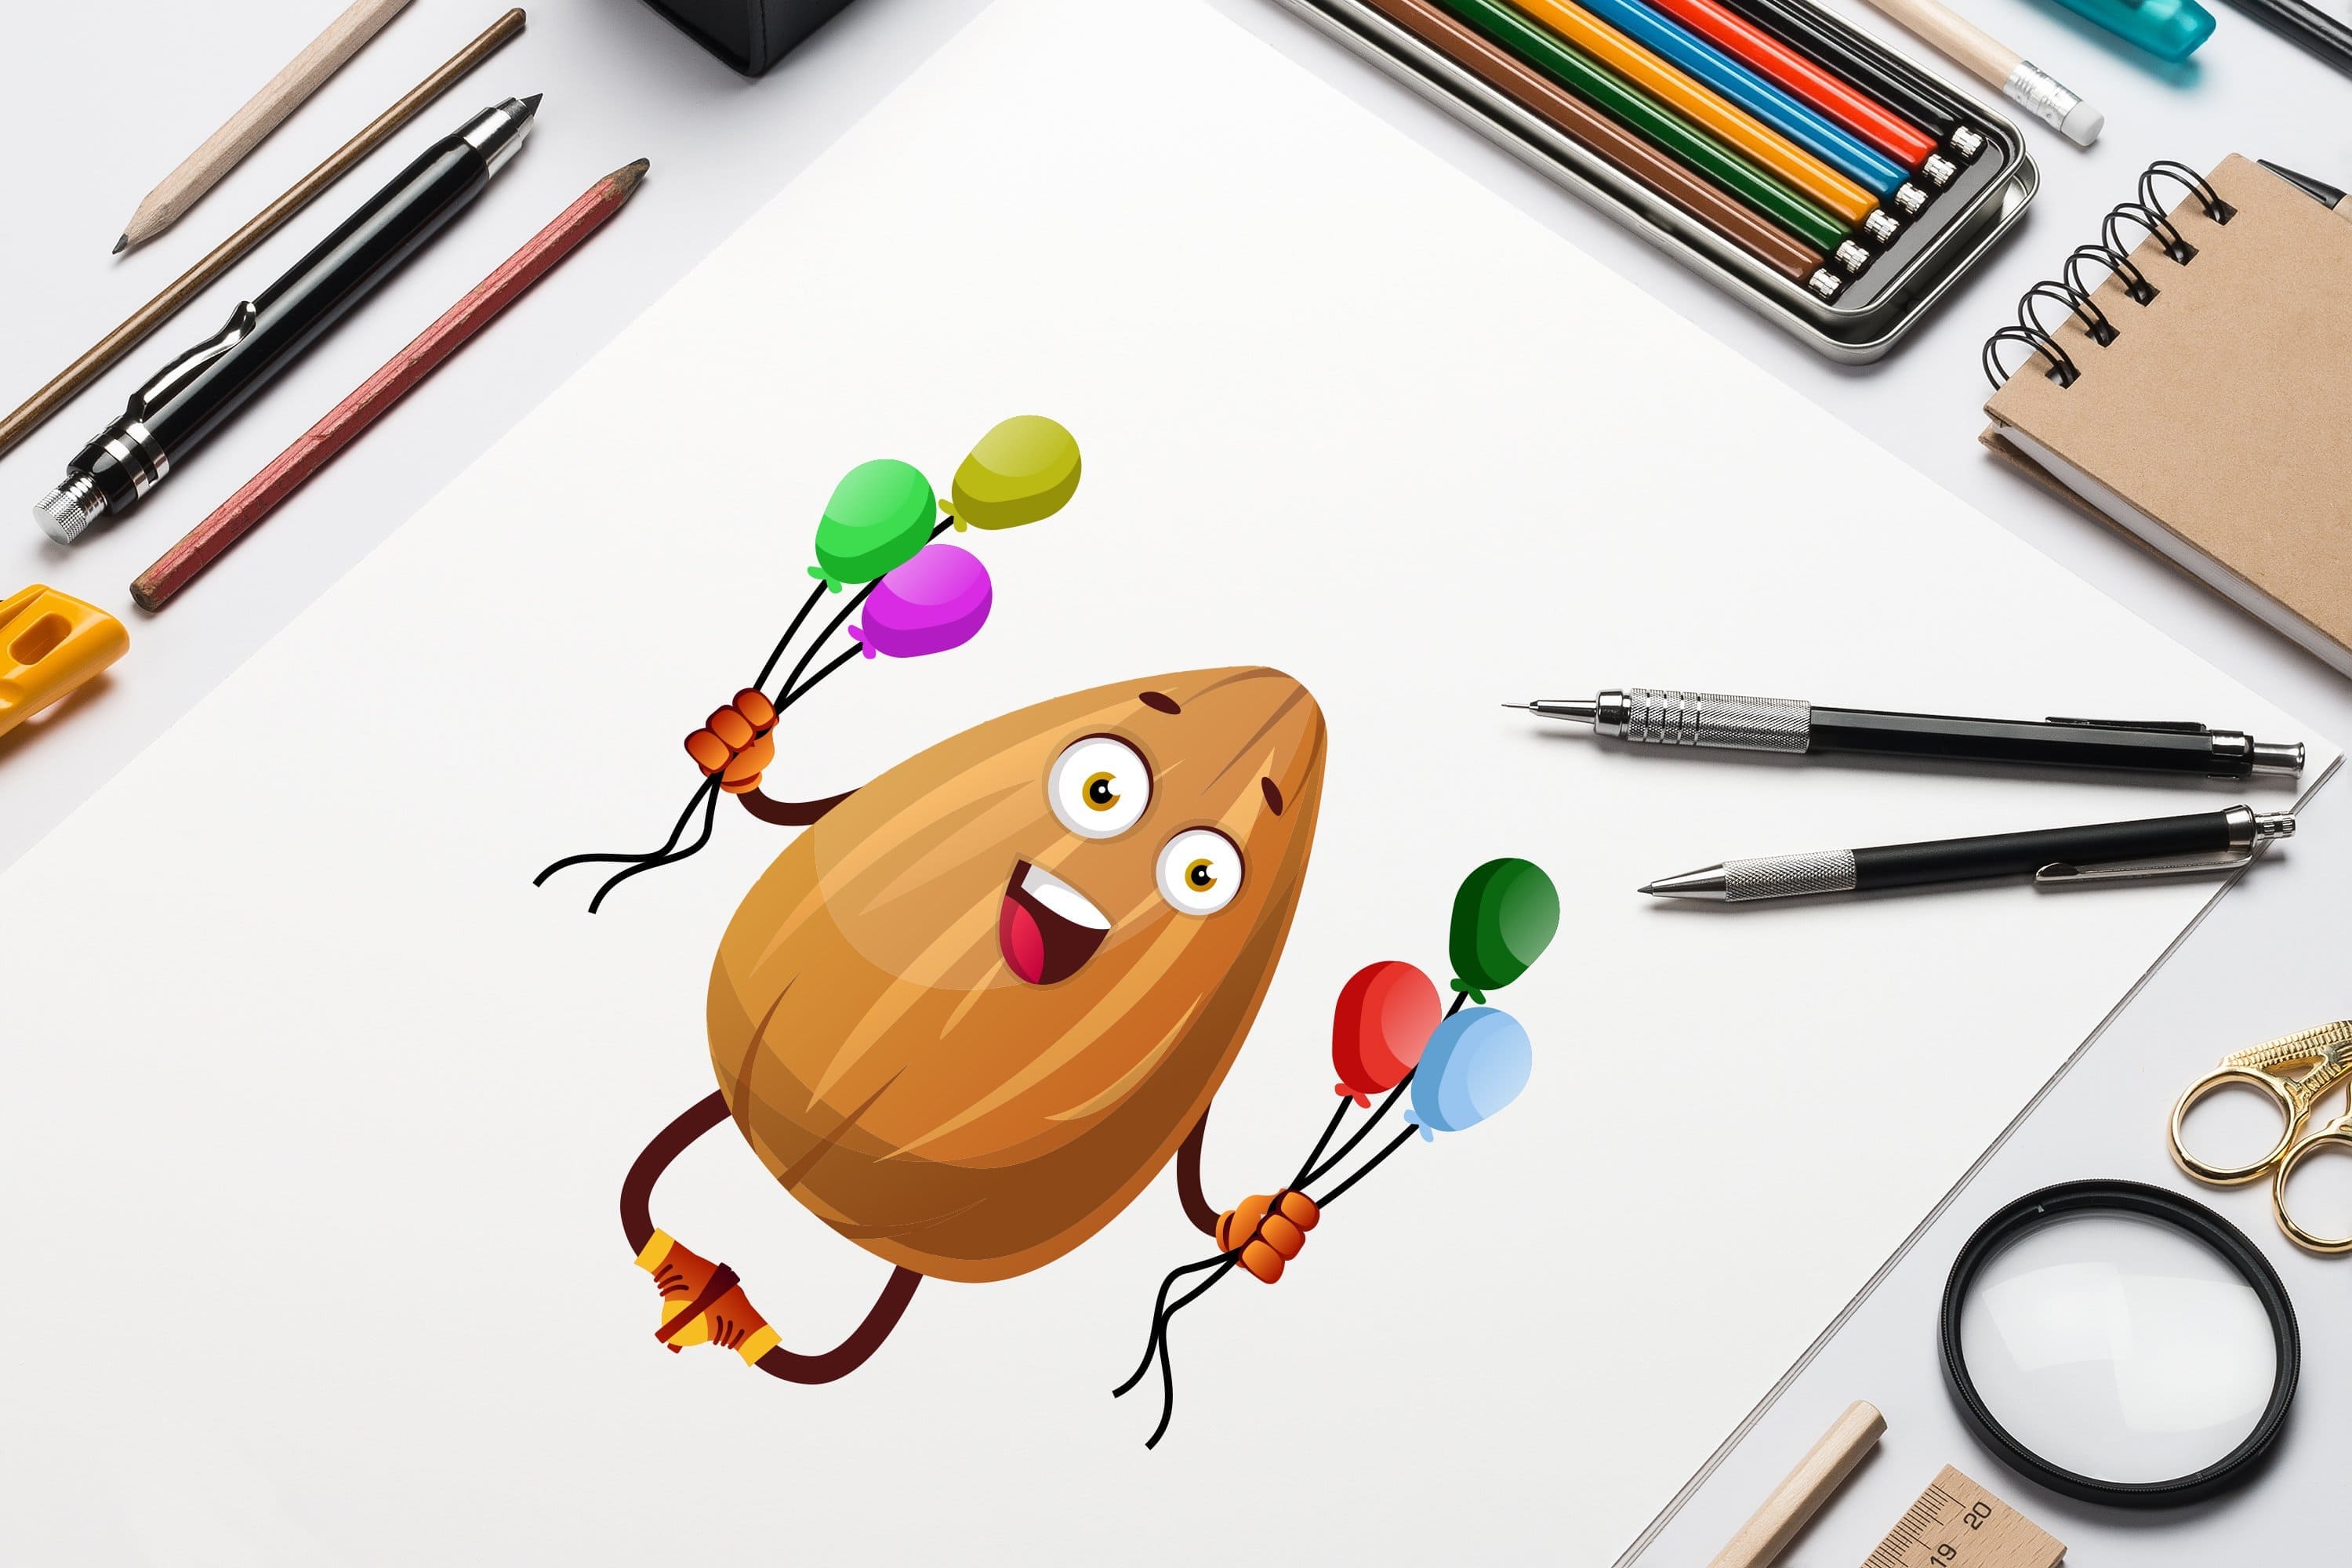 An almond holding balloons is drawn on a white sheet of paper.